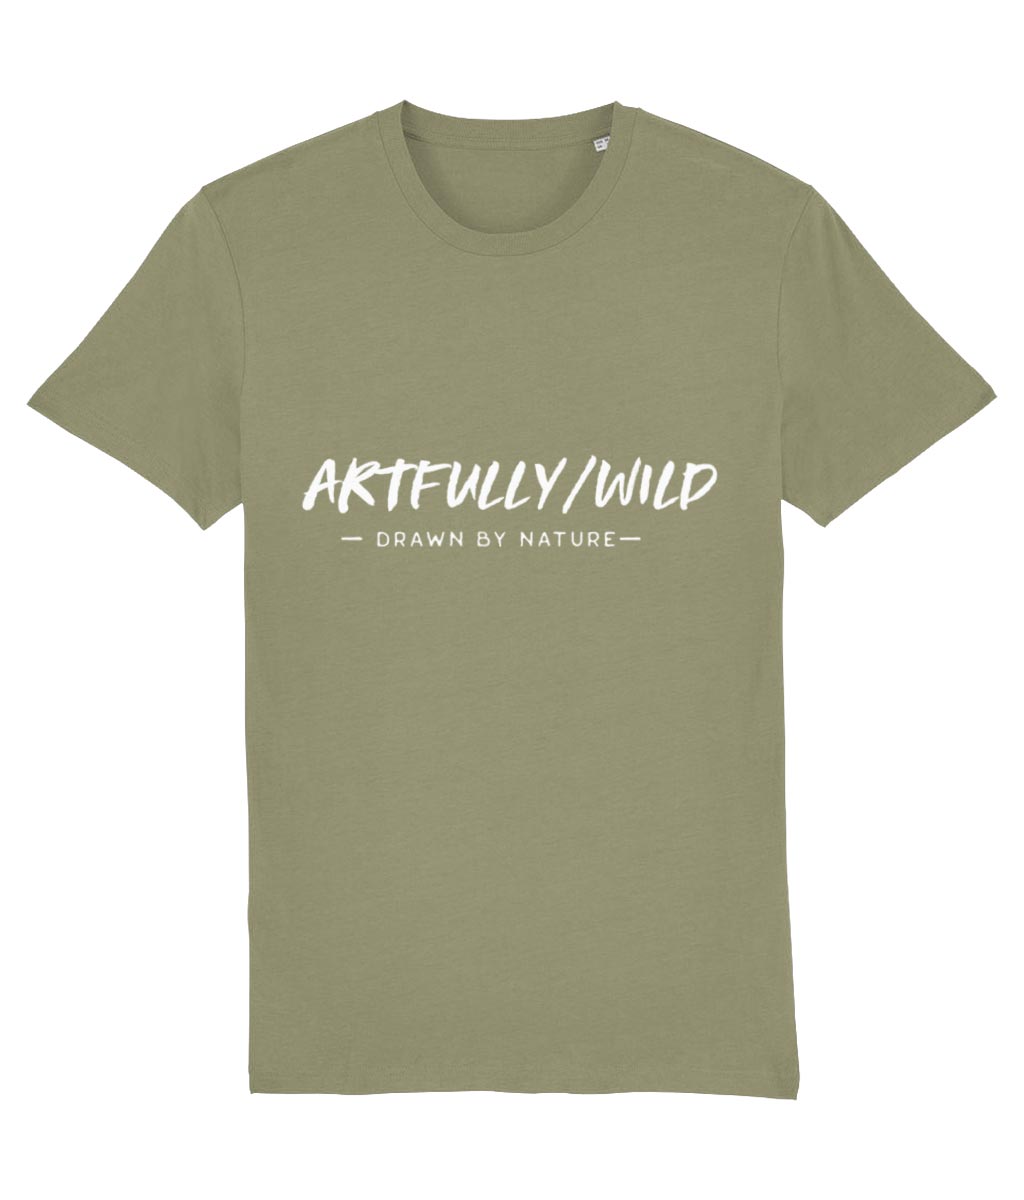 'ARTFULLY WILD. DRAWN BY NATURE' Organic Cotton Sage Green T-Shirt. Unisex/Men/Women. Printed with eco-friendly water-based Inks. Sustainable Ethical Clothing by Artfully/Wild.